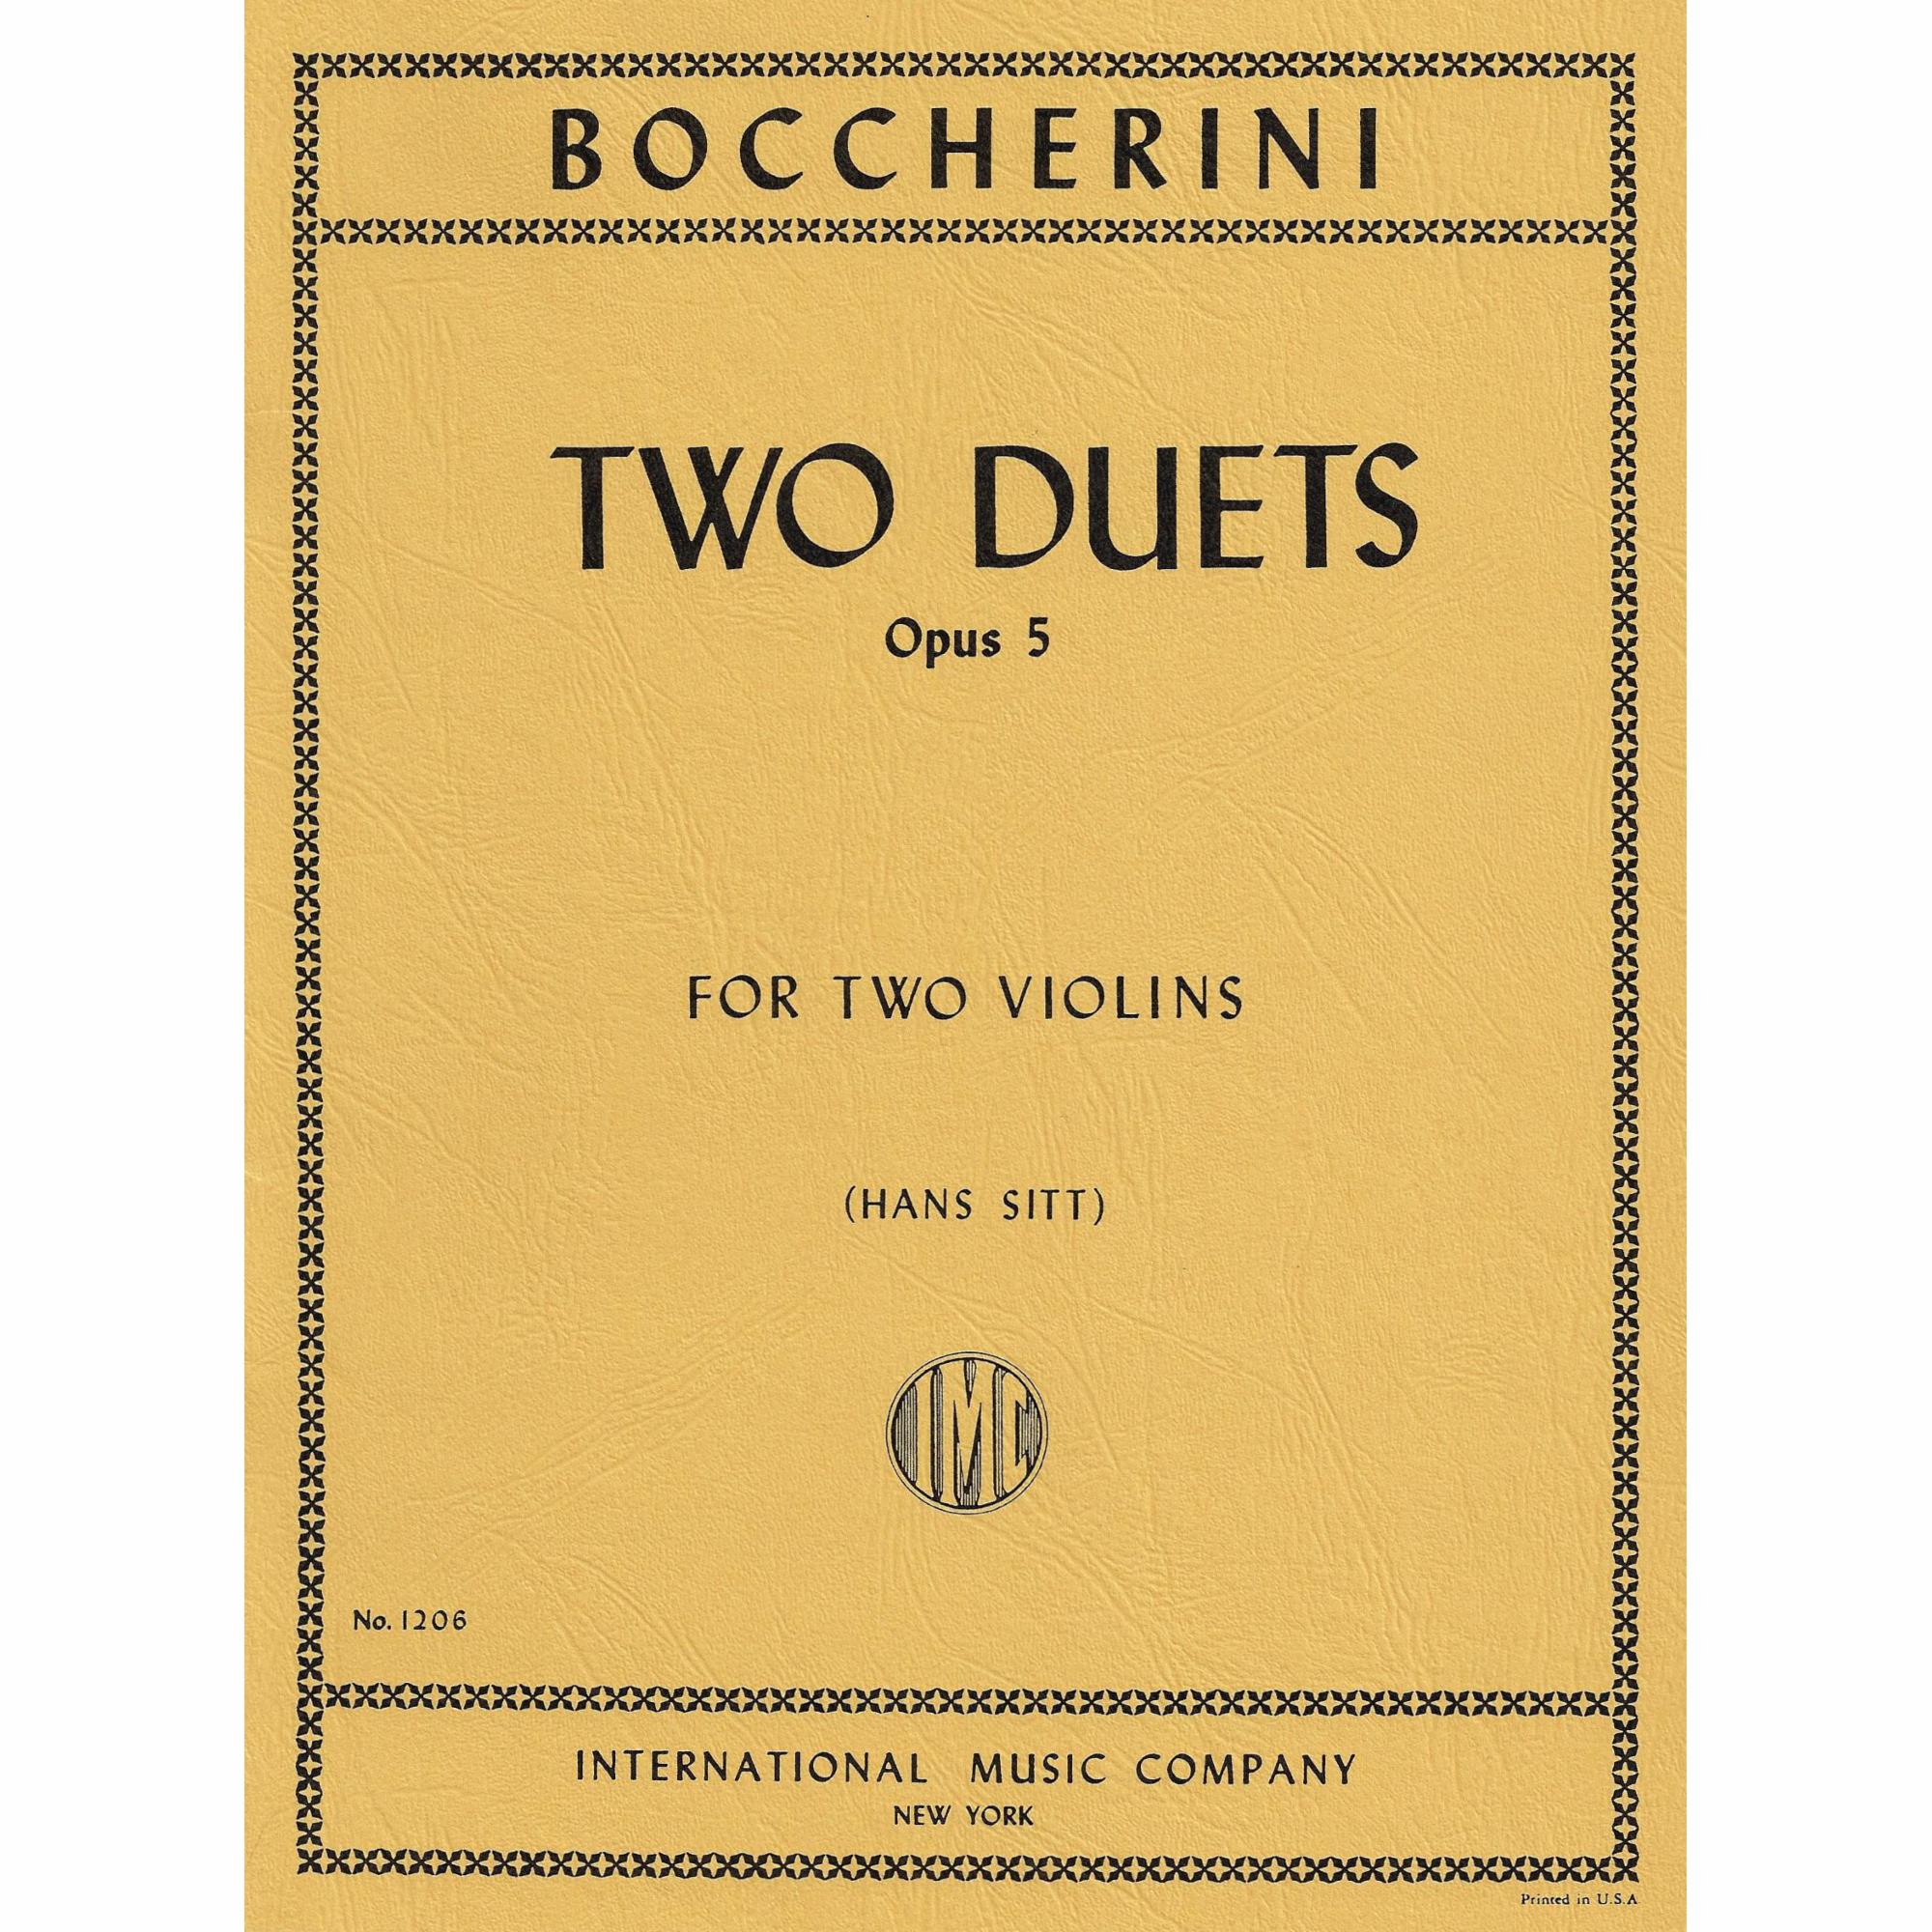 Boccherini -- Two Duets, Op. 5 for Two Violins